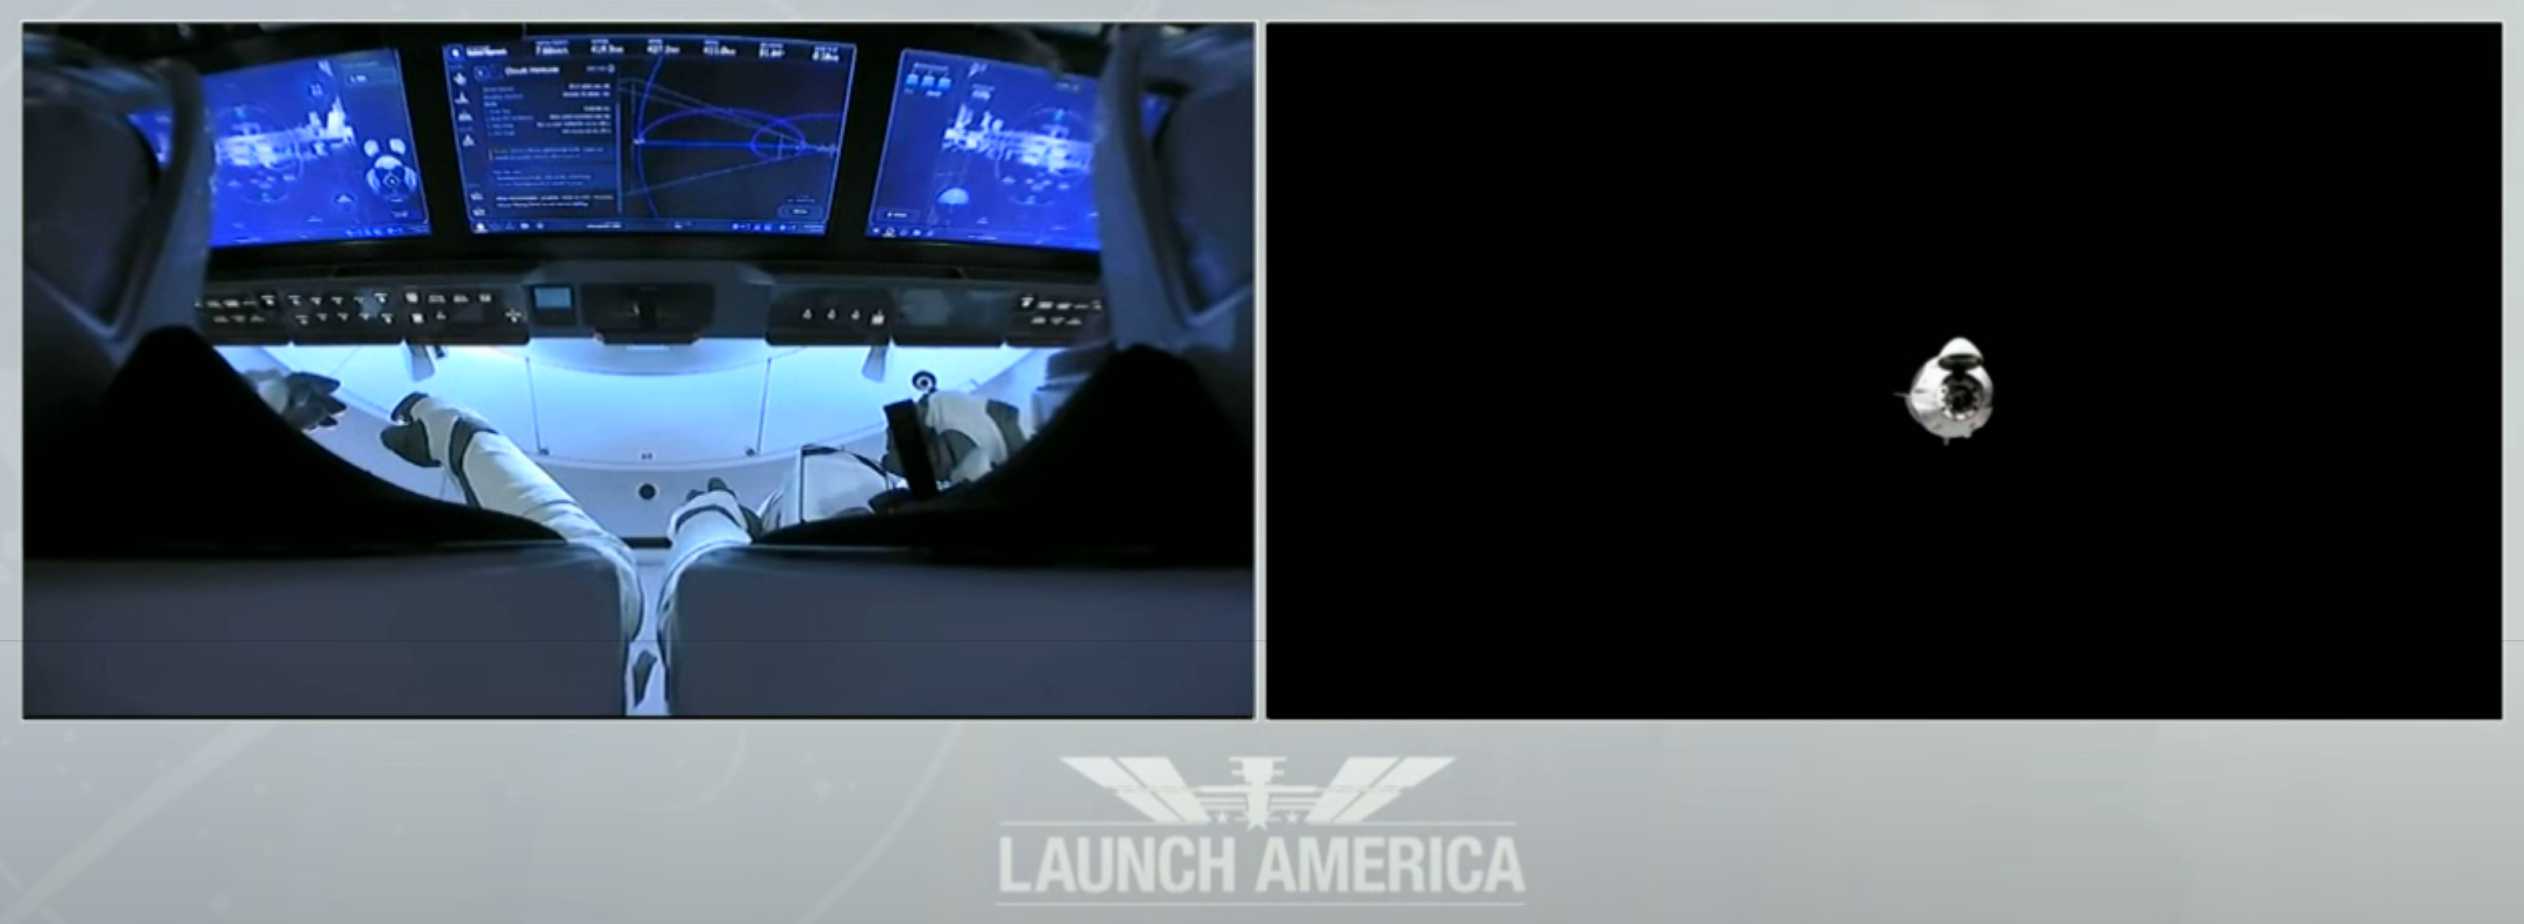 Crew Dragon C206 F9 B1058 Demo-2 053120 ISS arrival webcast (SpaceX) 8 (c)